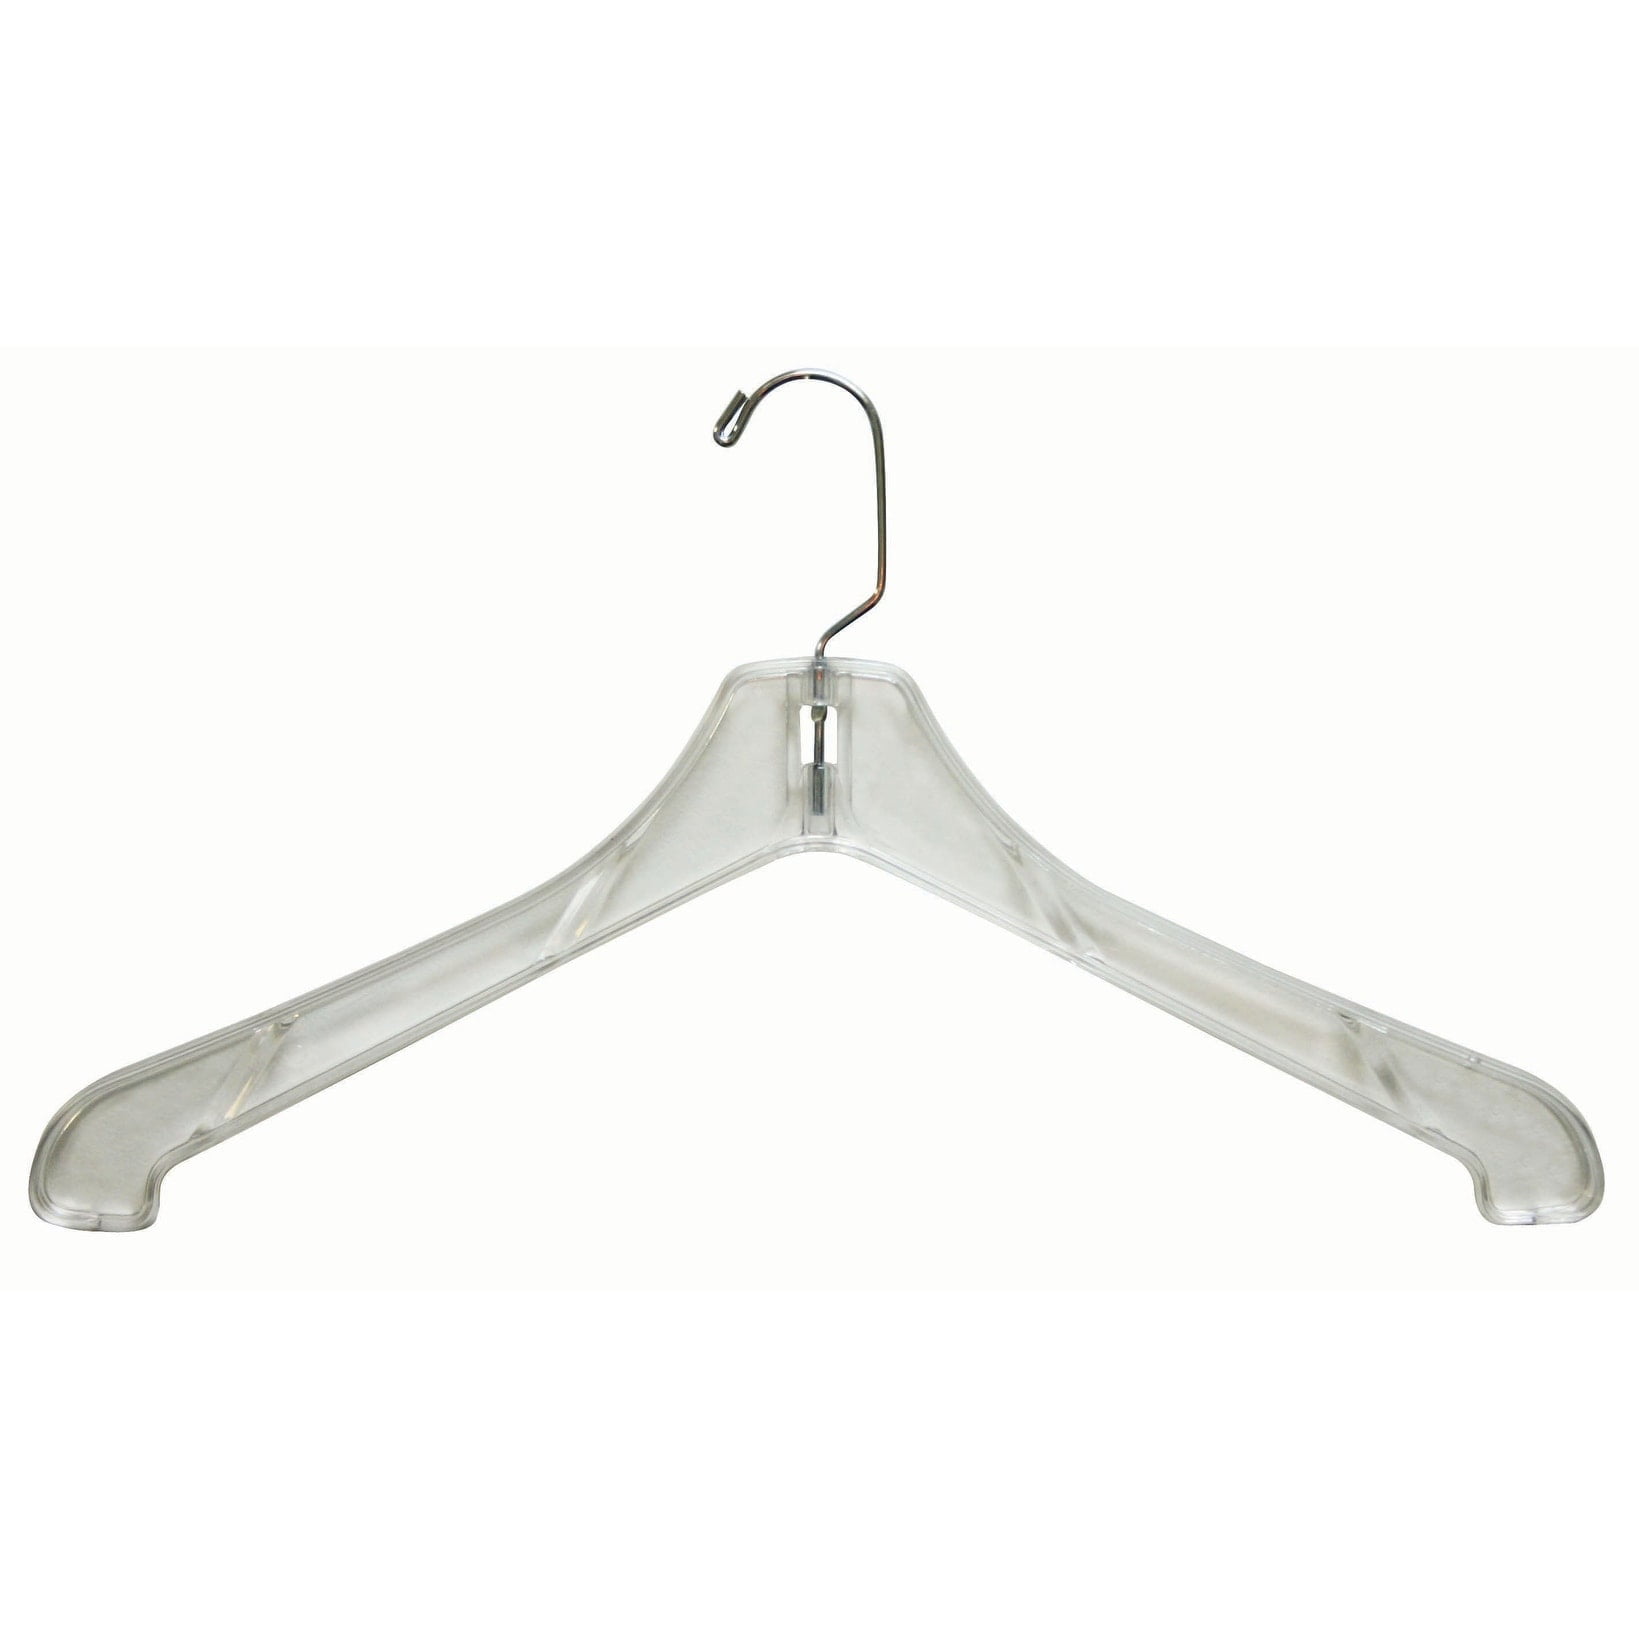 Box of 100 The Great American Hanger Company Metal Non-Slip Vinyl Coated Top Hanger White Finish with Chrome Hardware 